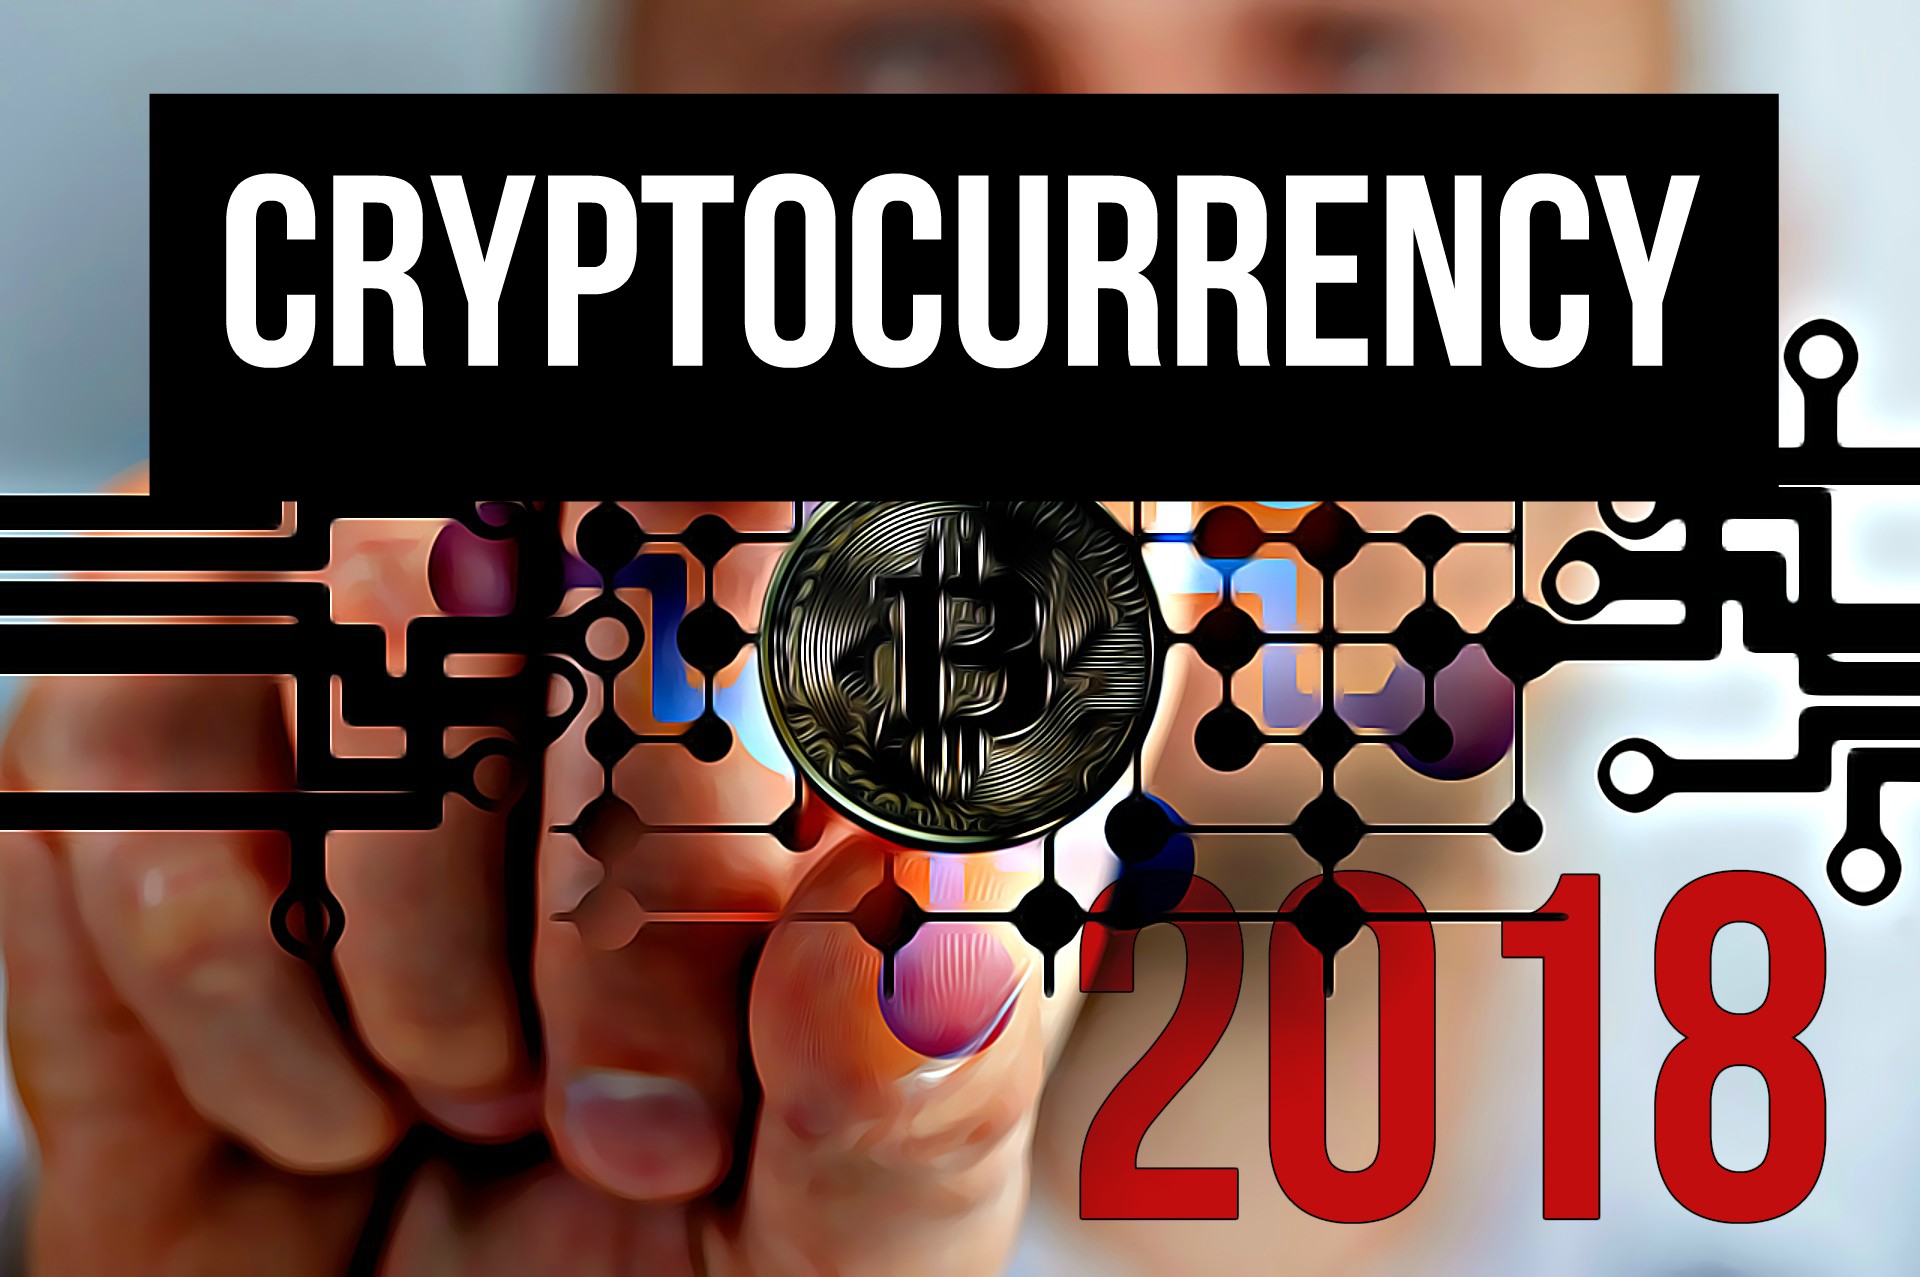 2018: What happened with cryptocurrency?